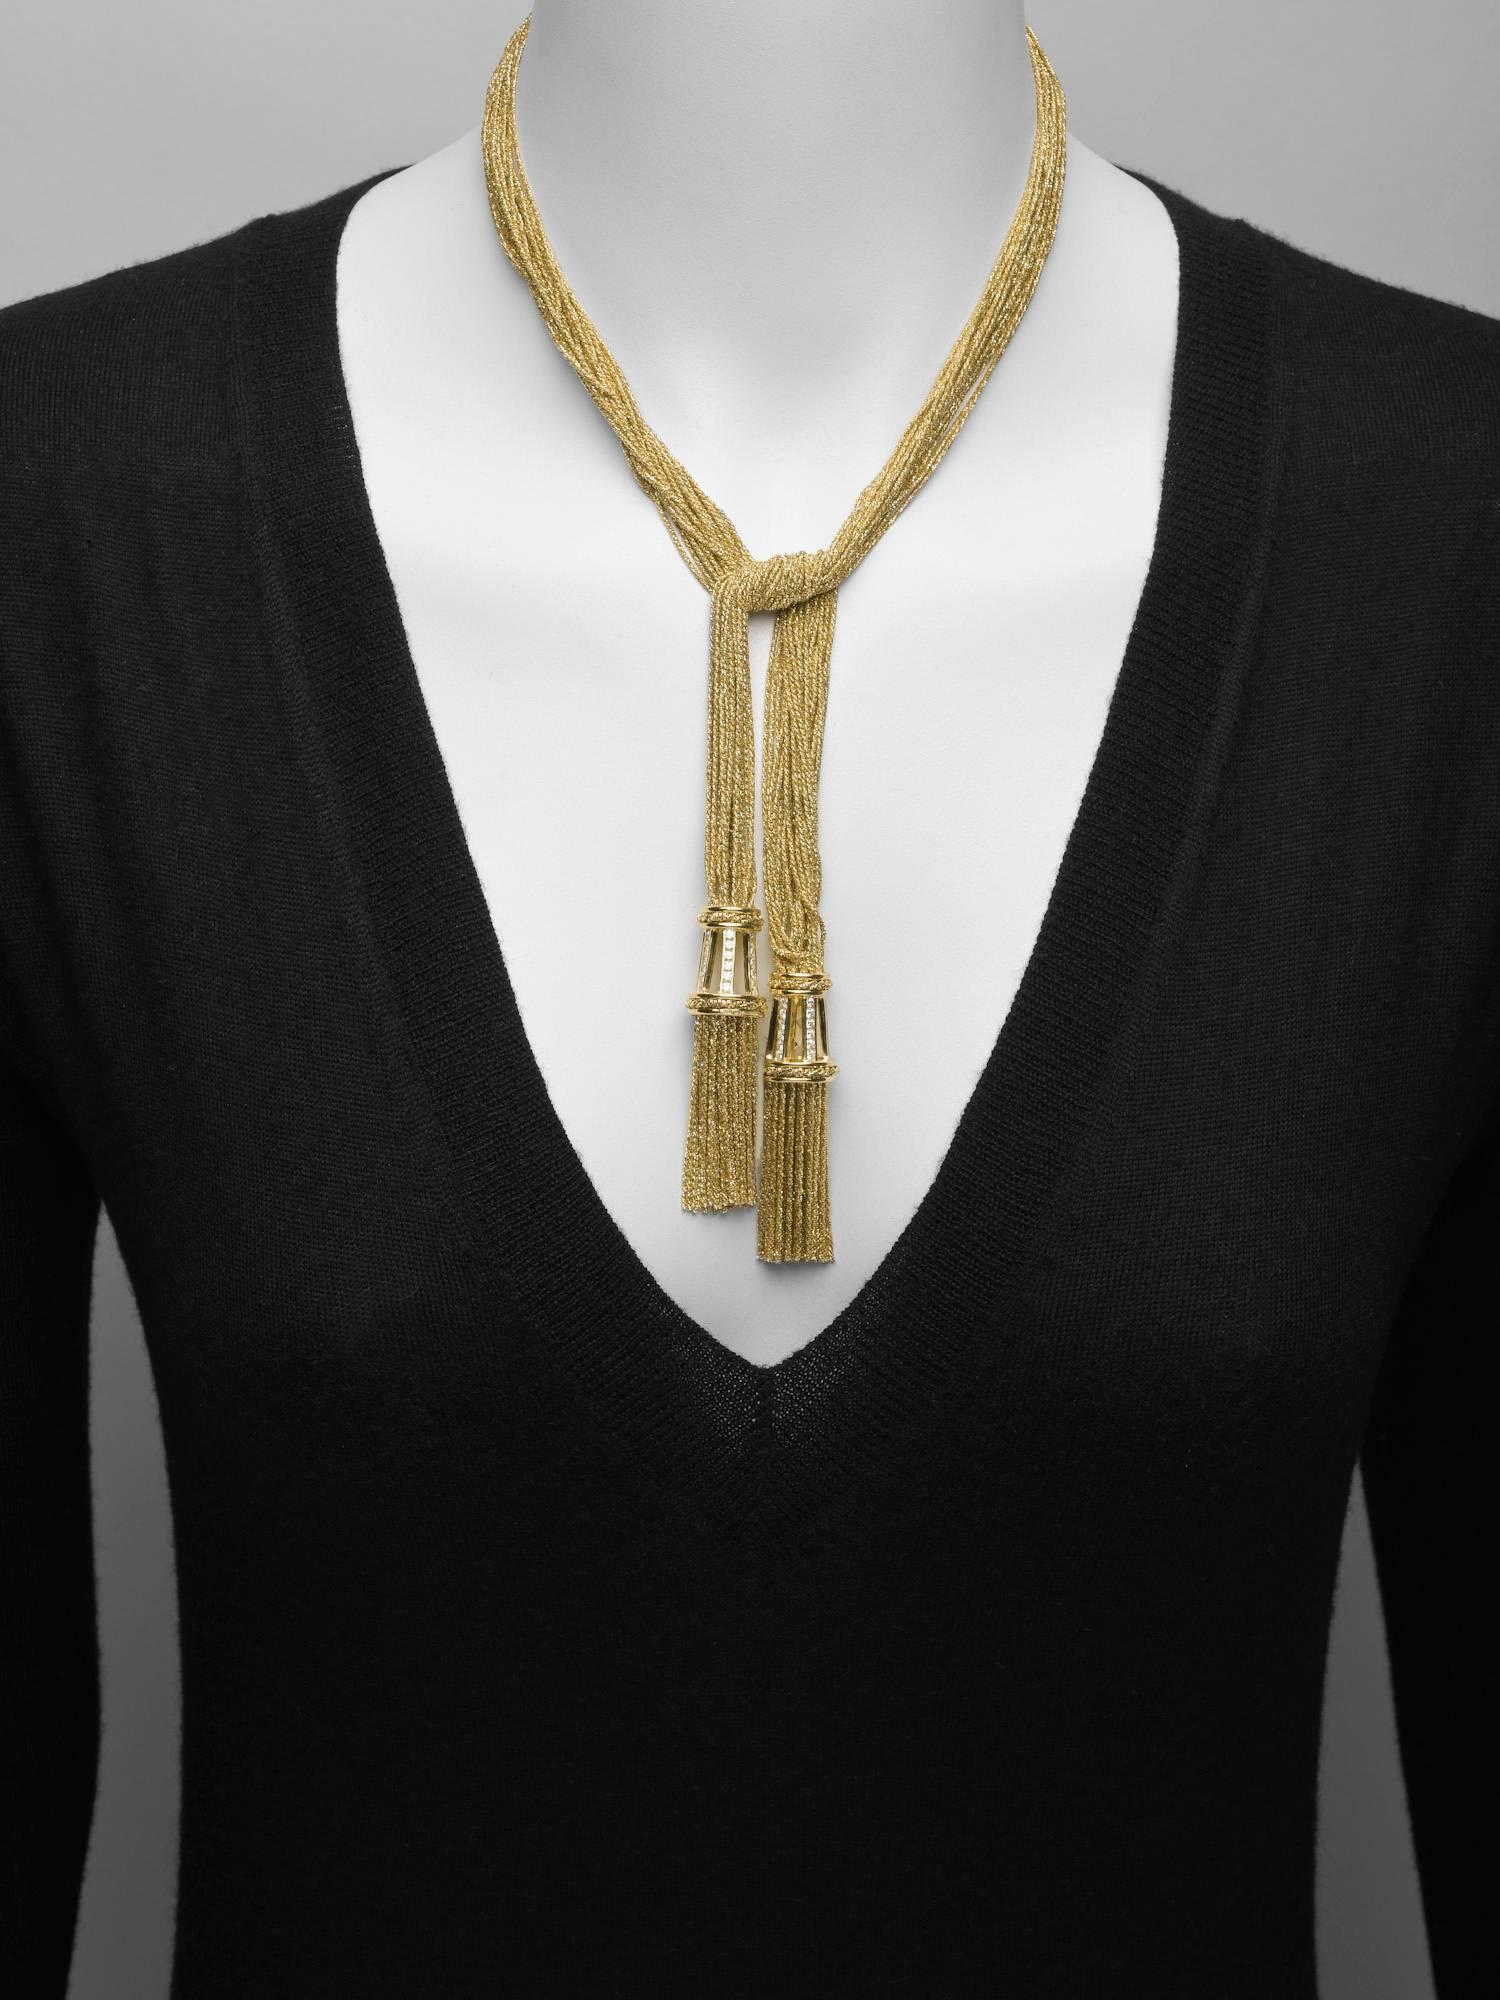 Lariat-style double tassel necklace, with twenty-one mesh strands in 18k yellow gold, either tassel pendant set with seventy-two round brilliant-cut diamonds weighing approximately 1.44 total carats (G-color, VVS-VS clarity), by Yuri Ichihashi.